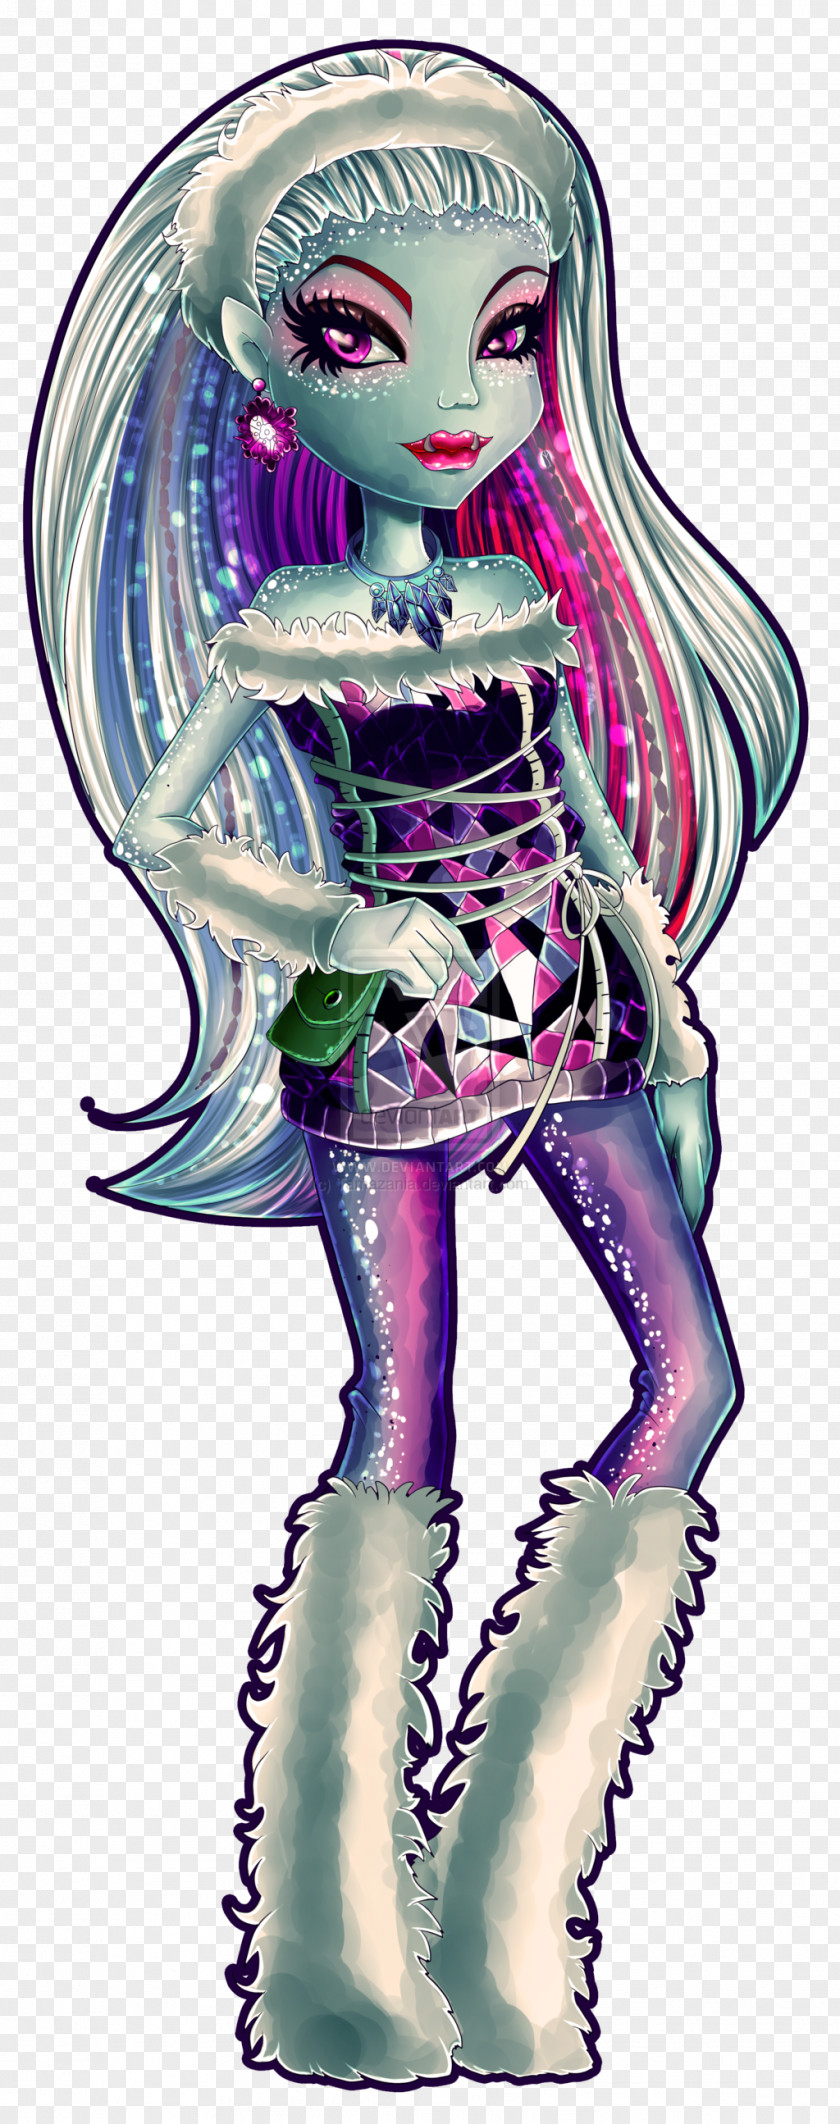 Abbey Bominable Monster High Illustration Cartoon Legendary Creature Organism Doll PNG